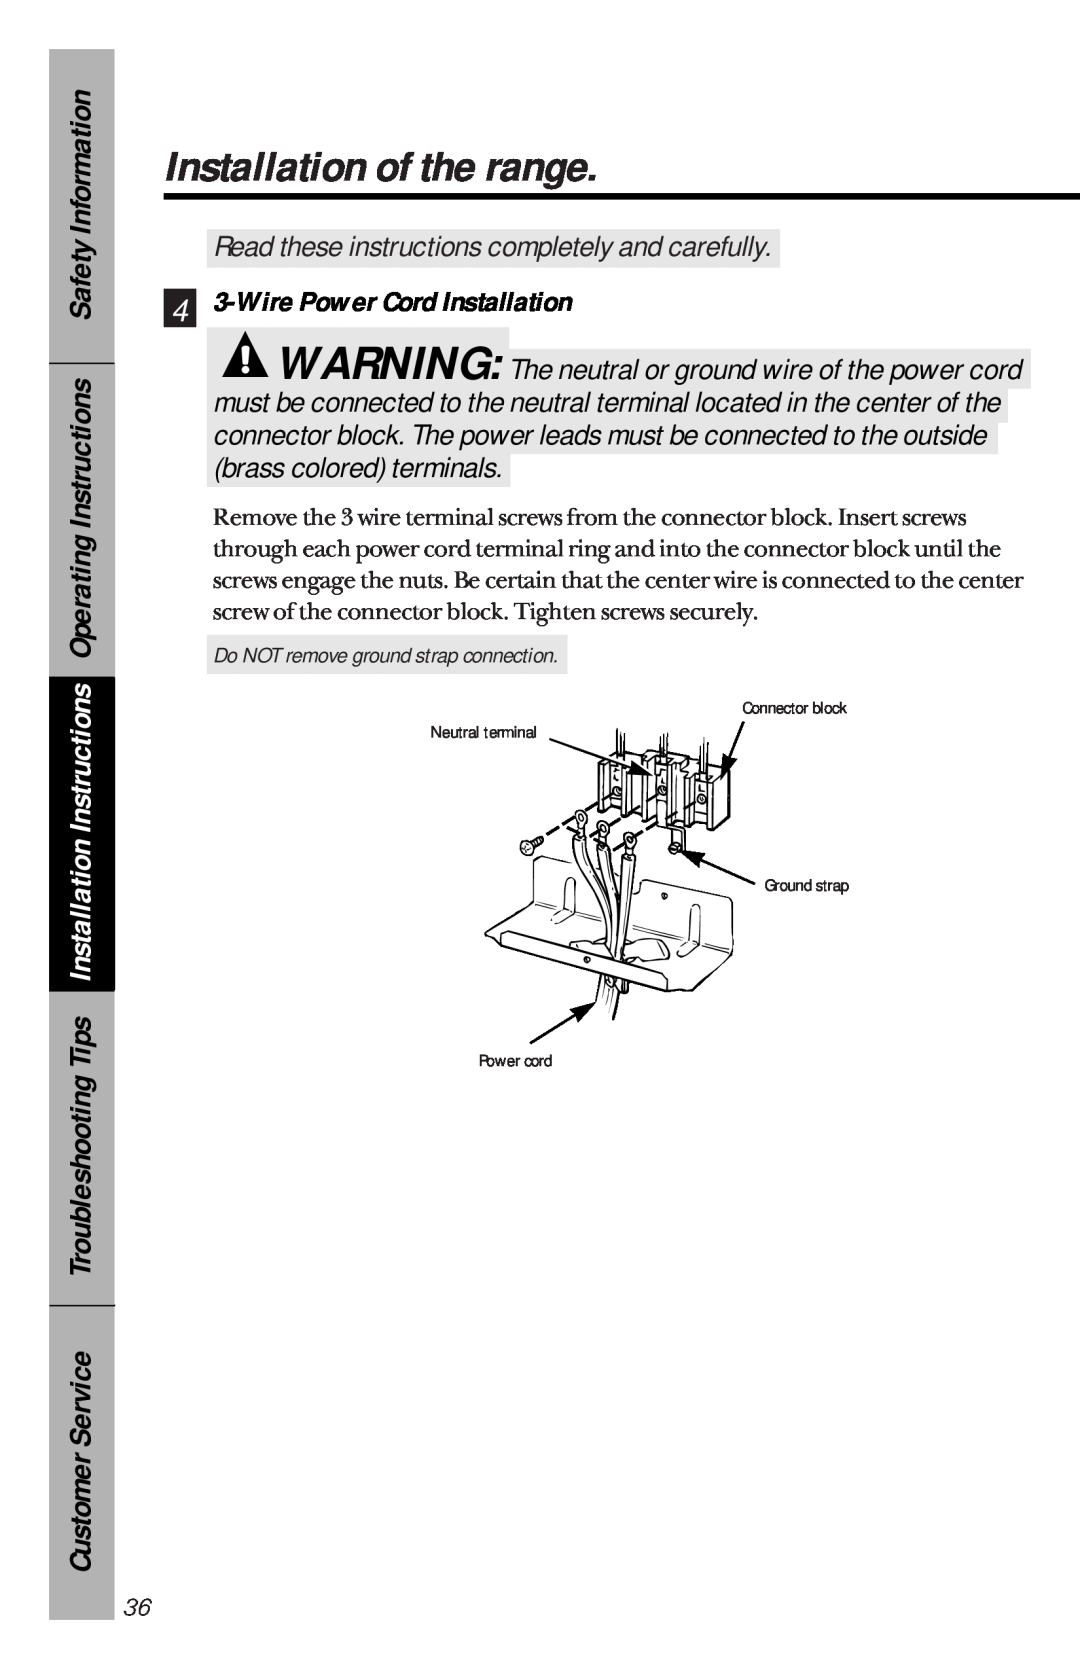 GE JBP63 4 3-Wire Power Cord Installation, Installation of the range, Read these instructions completely and carefully 